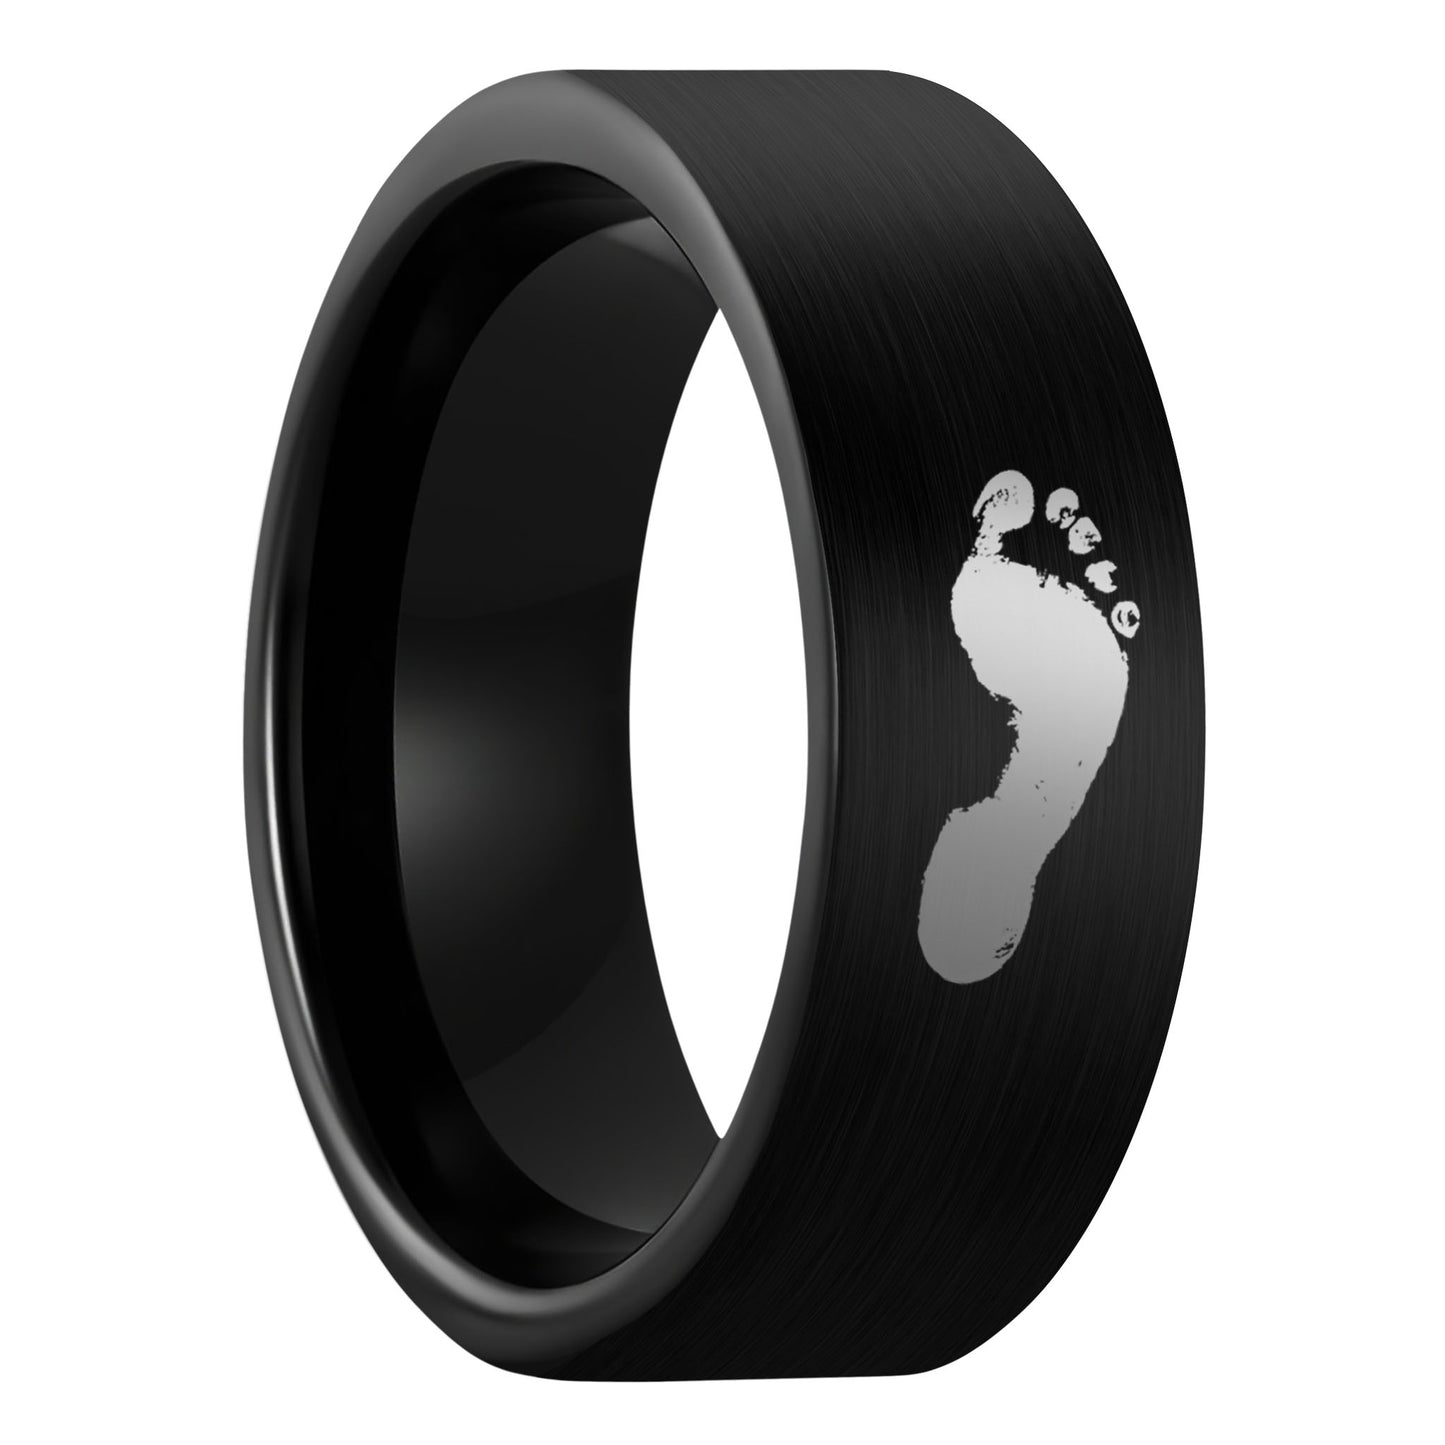 A custom footprint brushed black tungsten men's wedding band displayed on a plain white background.